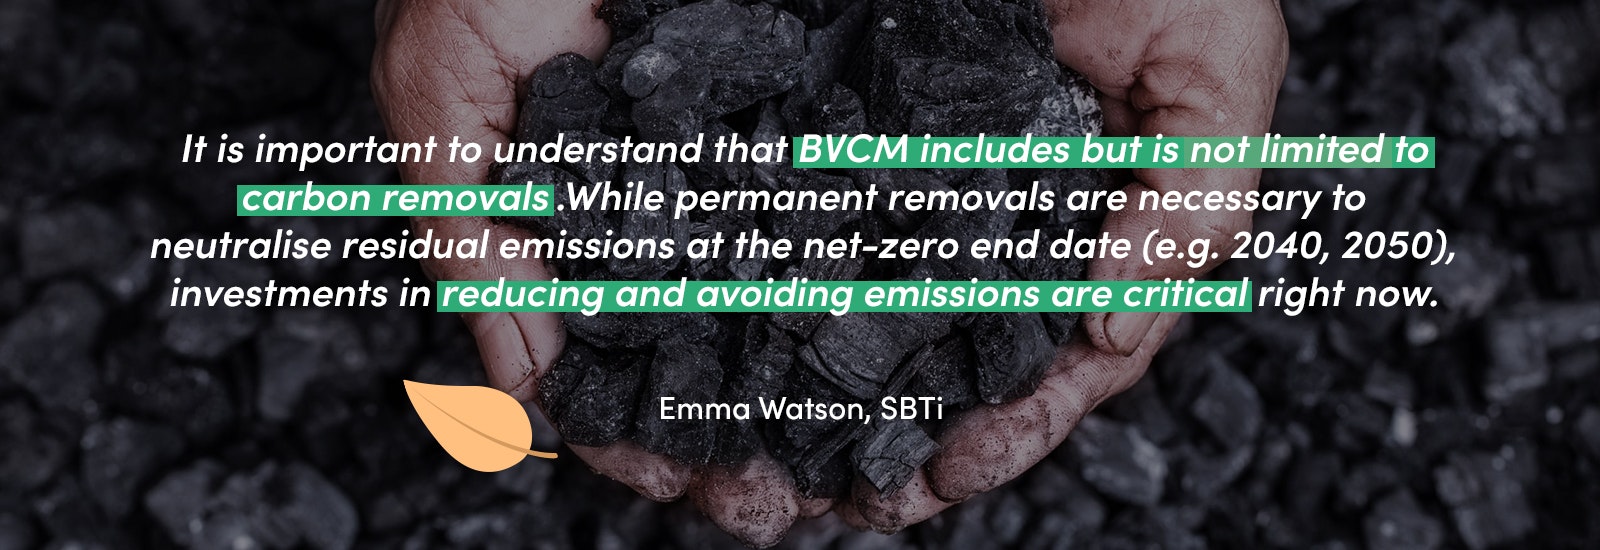 It is important to understand that BVCM includes but is not limited to carbon removals. While permanent removals are necessary to neutralise residual emissions at the net-zero end date (e.g. 2040, 2050), investments in reducing and avoiding emissions are critical right now.